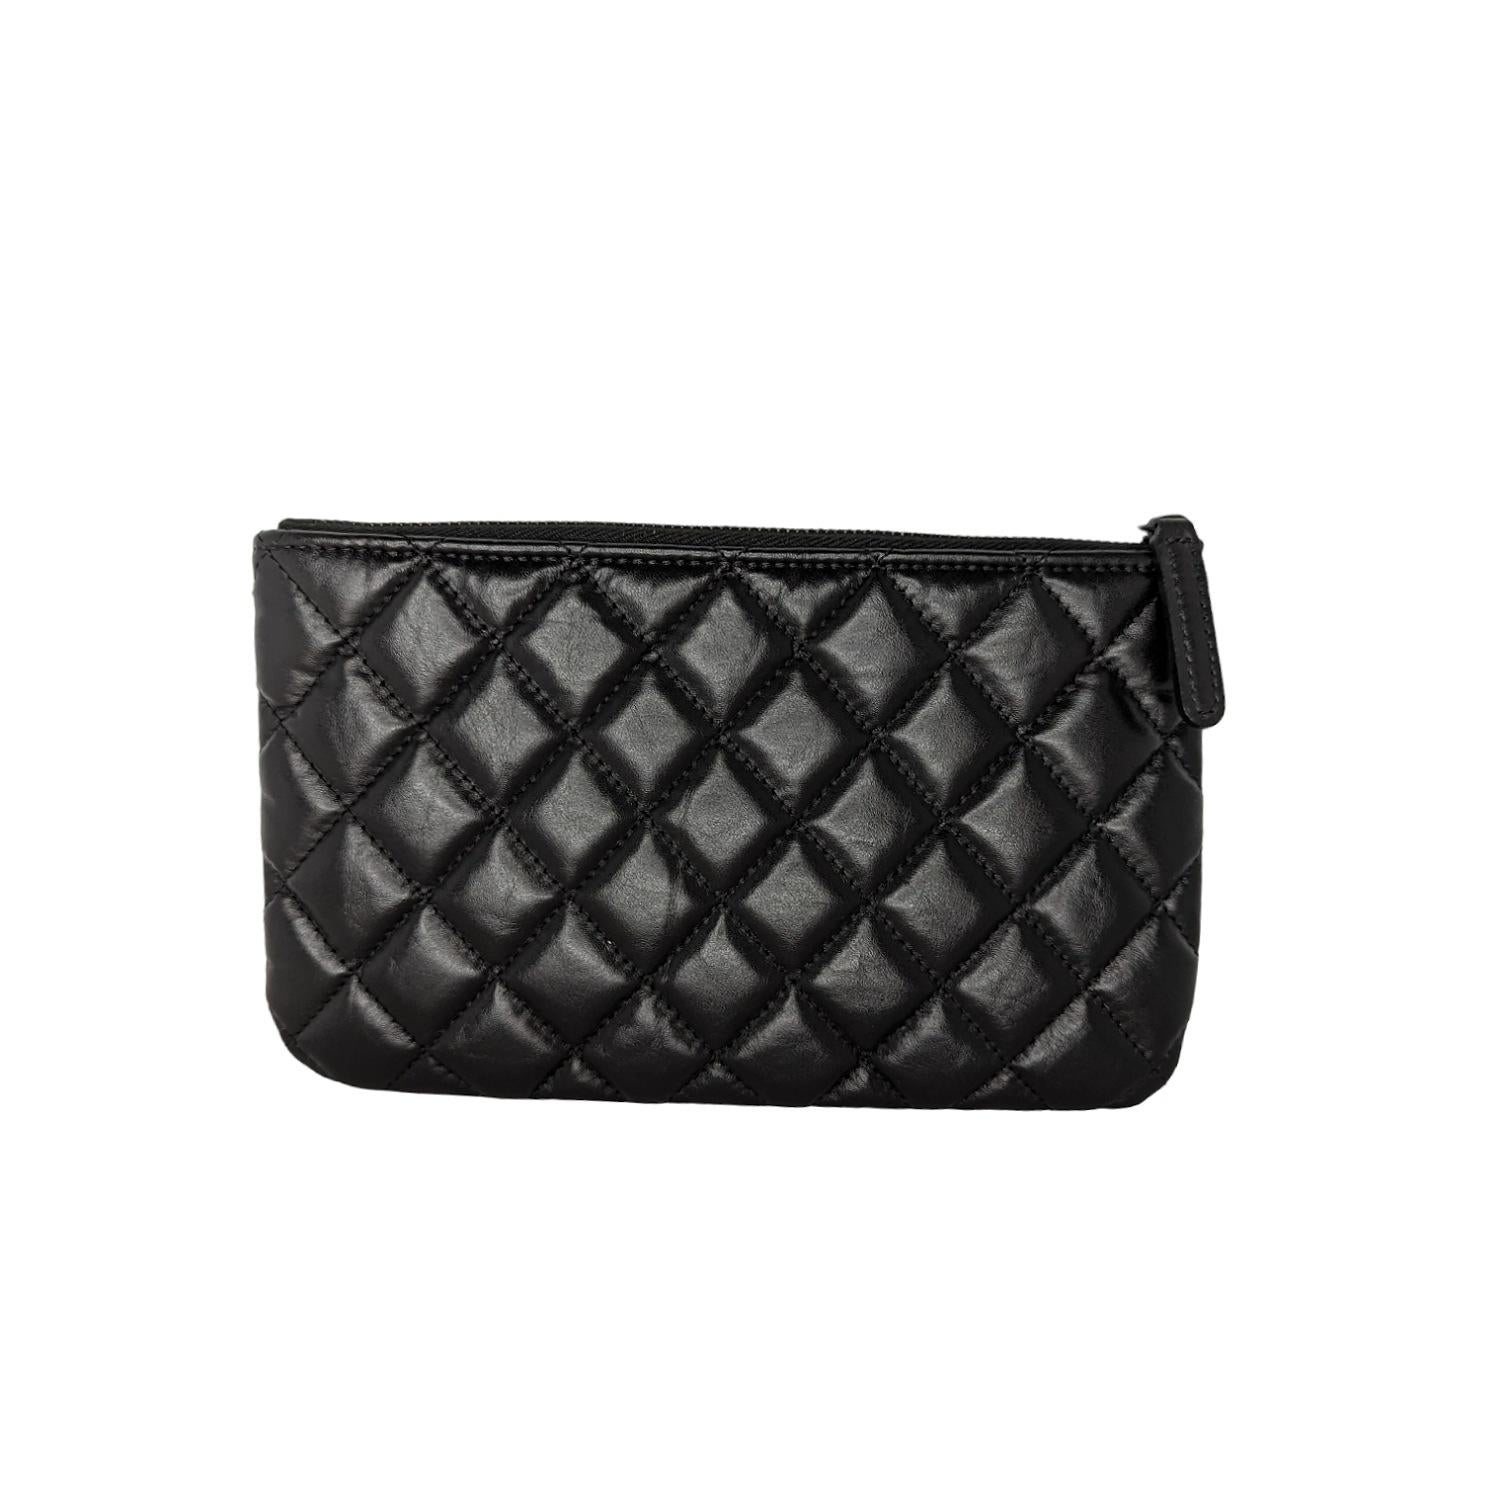 Chanel Aged Calfskin Quilted Medium Reissue Cosmetic Case So in Black. This stylish cosmetic pouch is crafted of diamond-quilted leather in black with a small black mademoiselle turn-lock embellishment. The top zipper opens to a black fabric